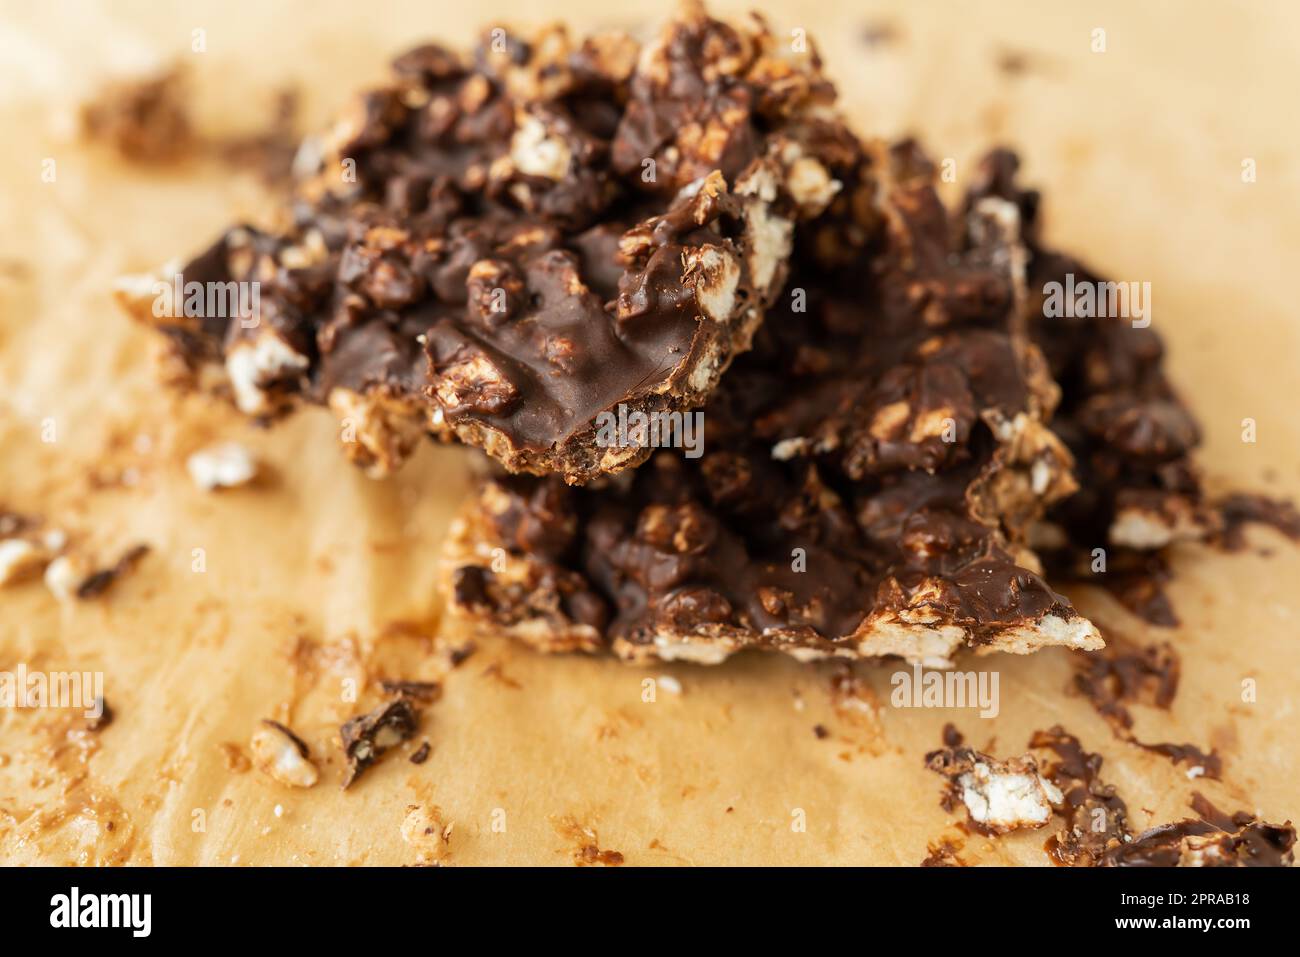 Close-up texture of peanut butter, puffed rice and chocolate, very tasty DIY dessert, dessert slices on parchment. Stock Photo